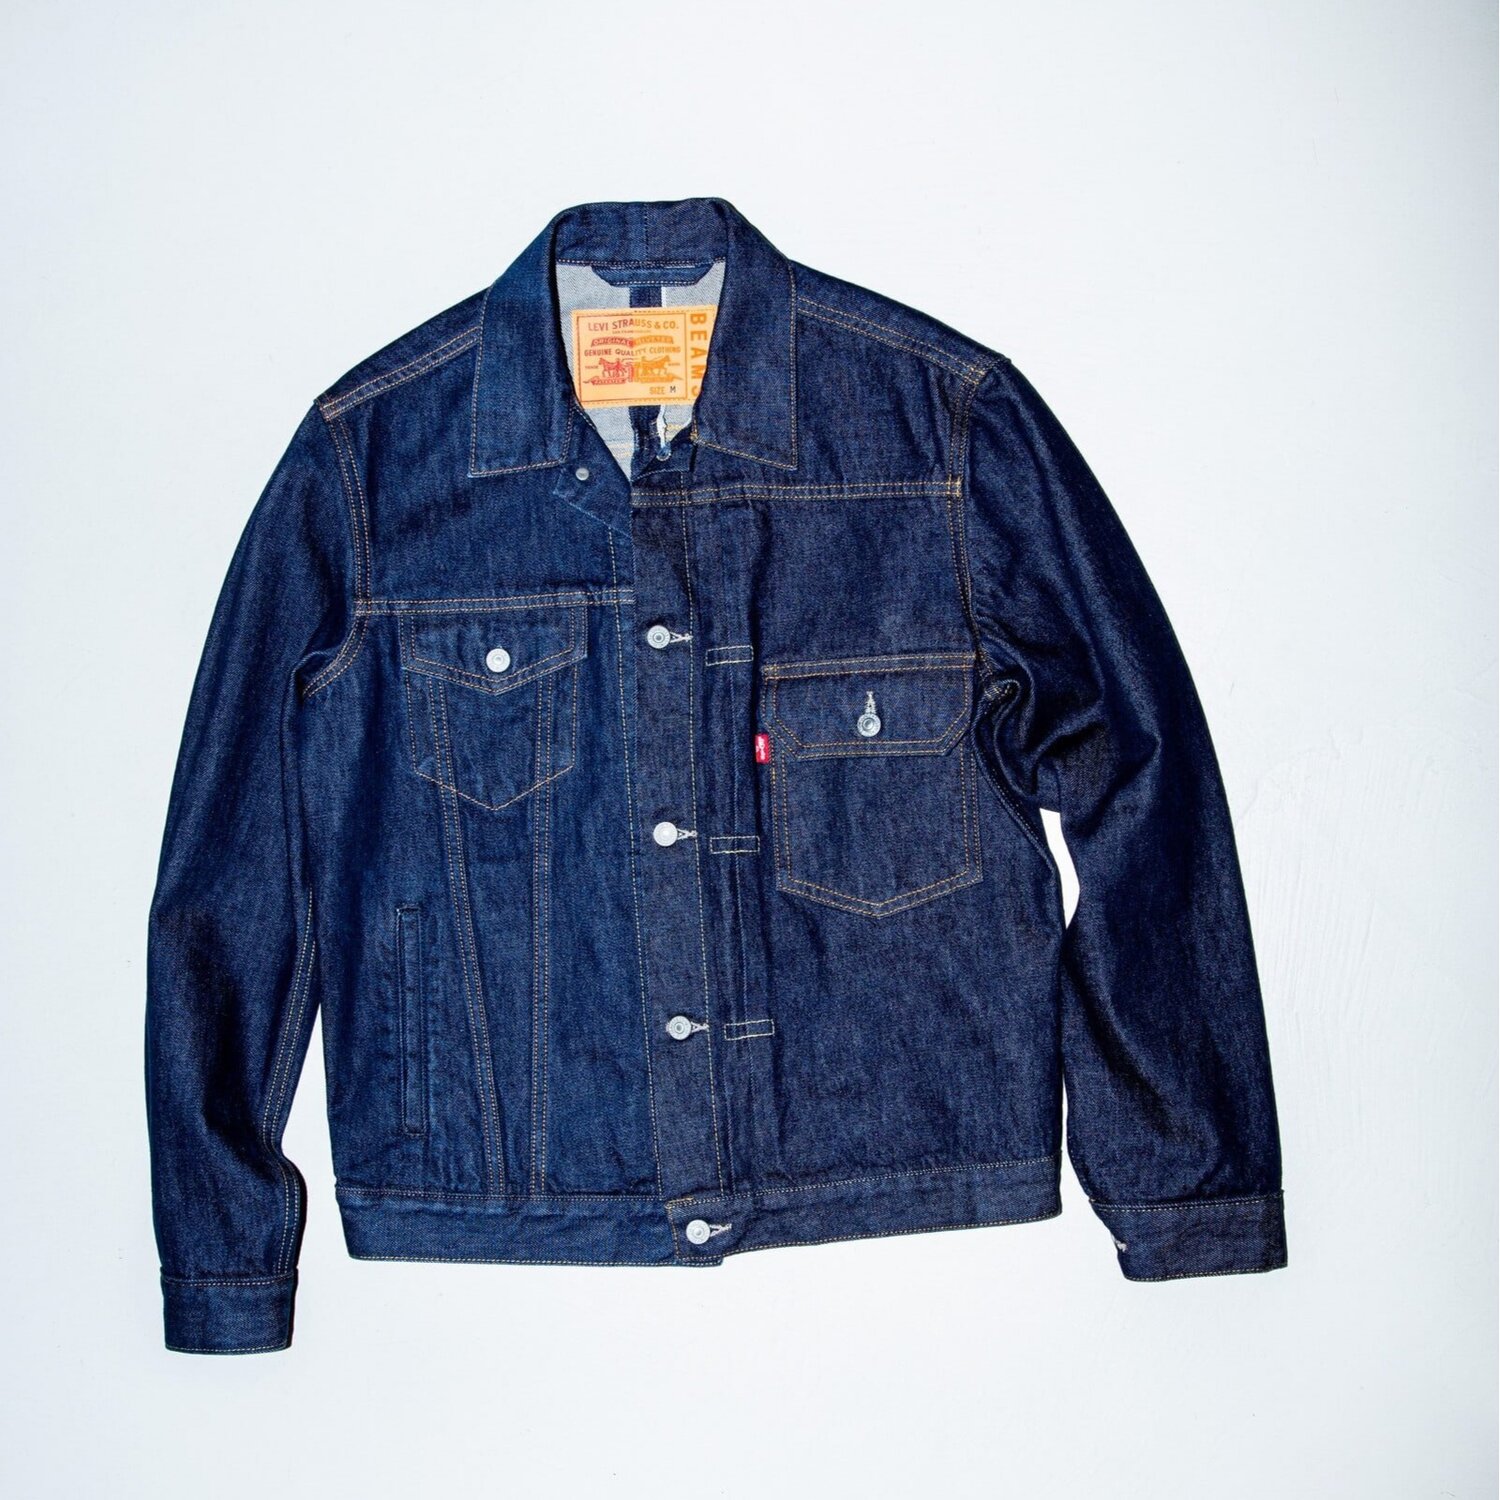 BEAMS and Levi's Split Classic Jeans and Trucker Jackets Down the Middle —  eye_C